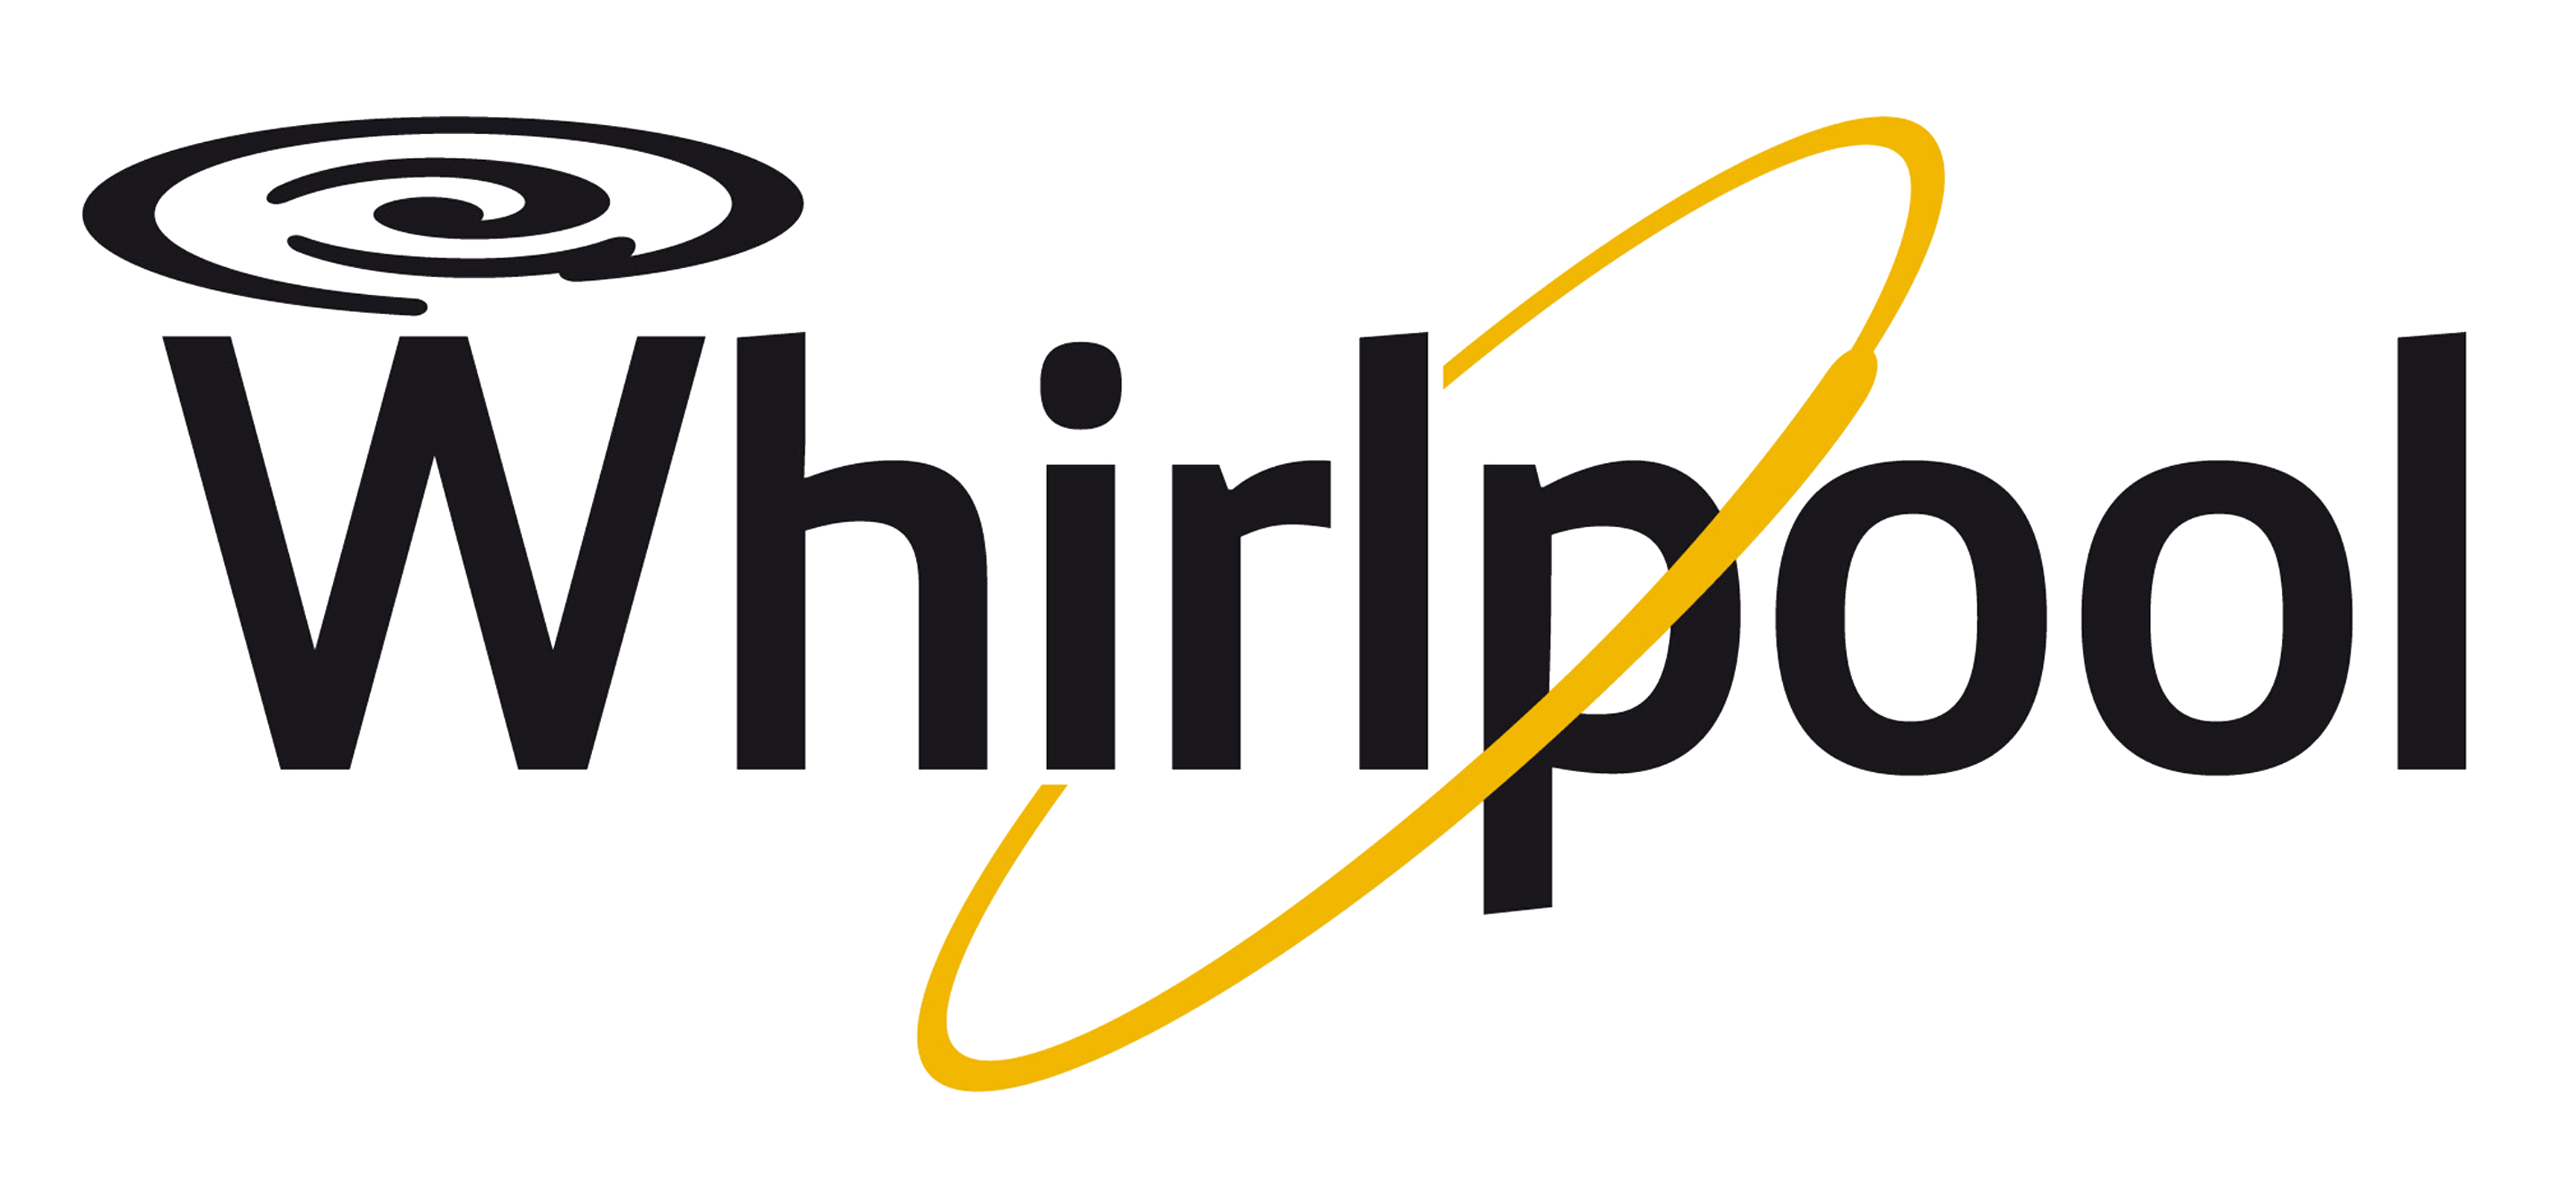 Whirlpool Washer Service, South Pasadena, LG Washer Dryer Technician